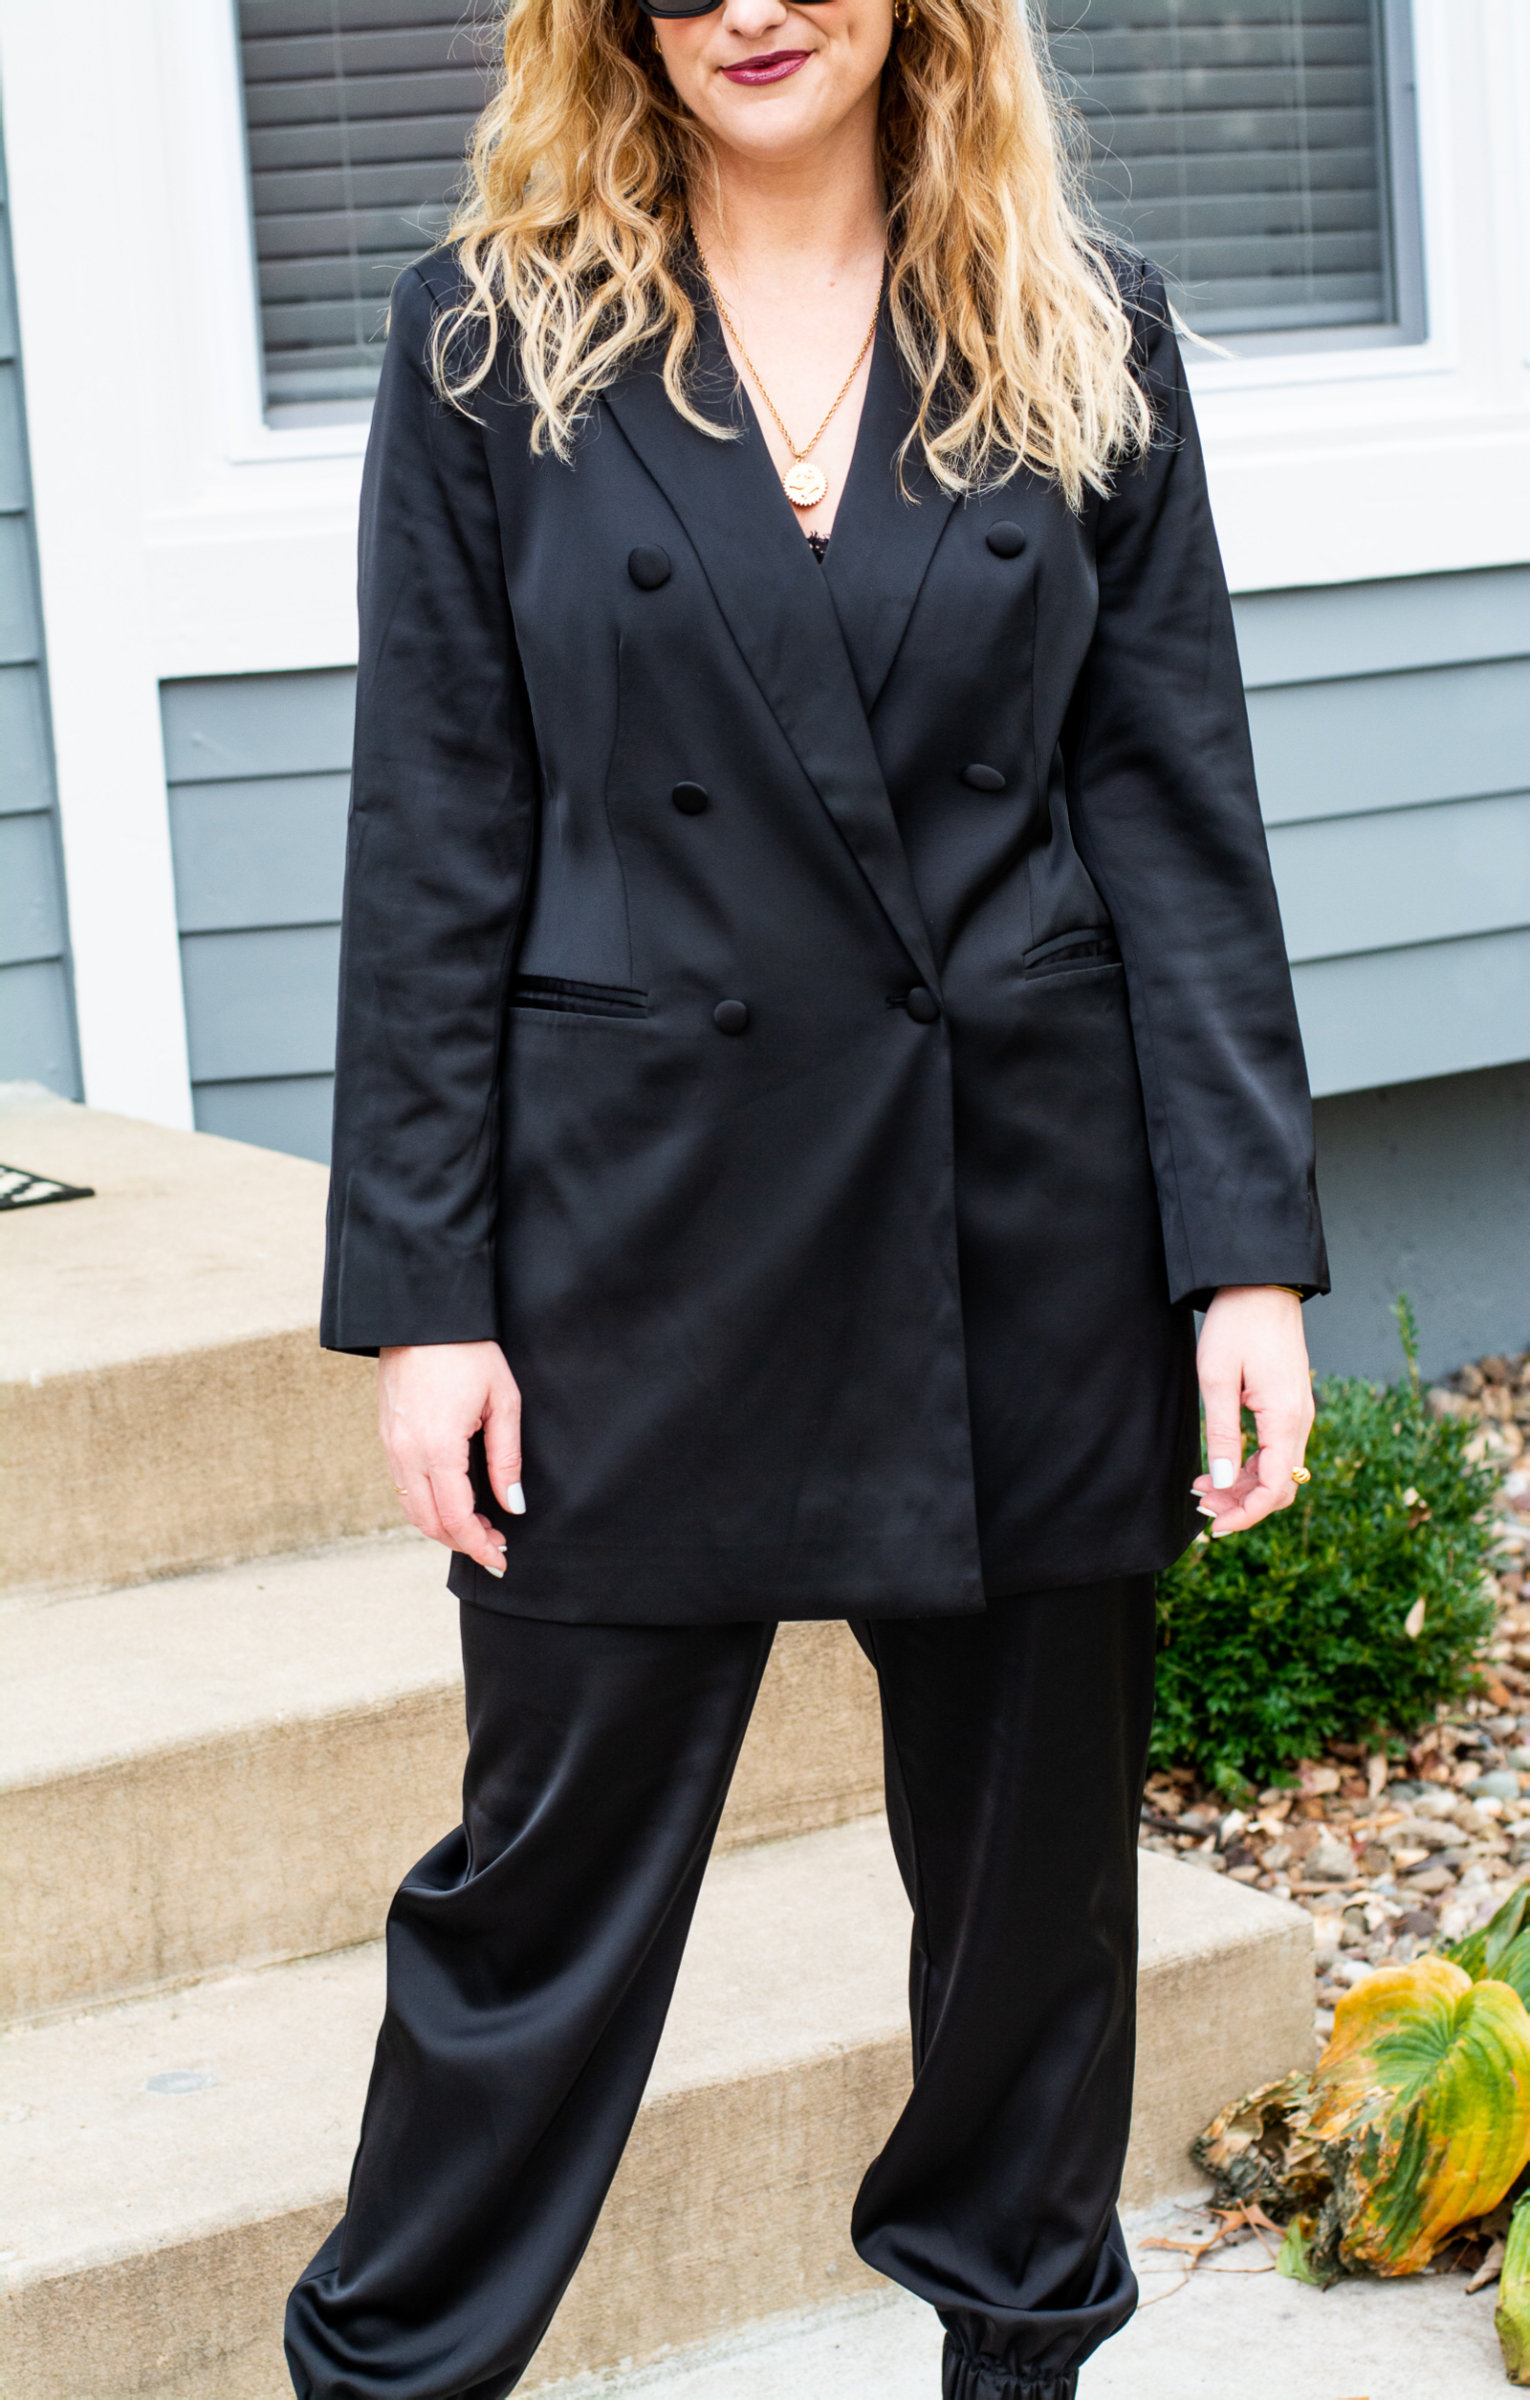 Satin Suit from KERRently the Drop for a Chic Holiday Outfit. | LSR